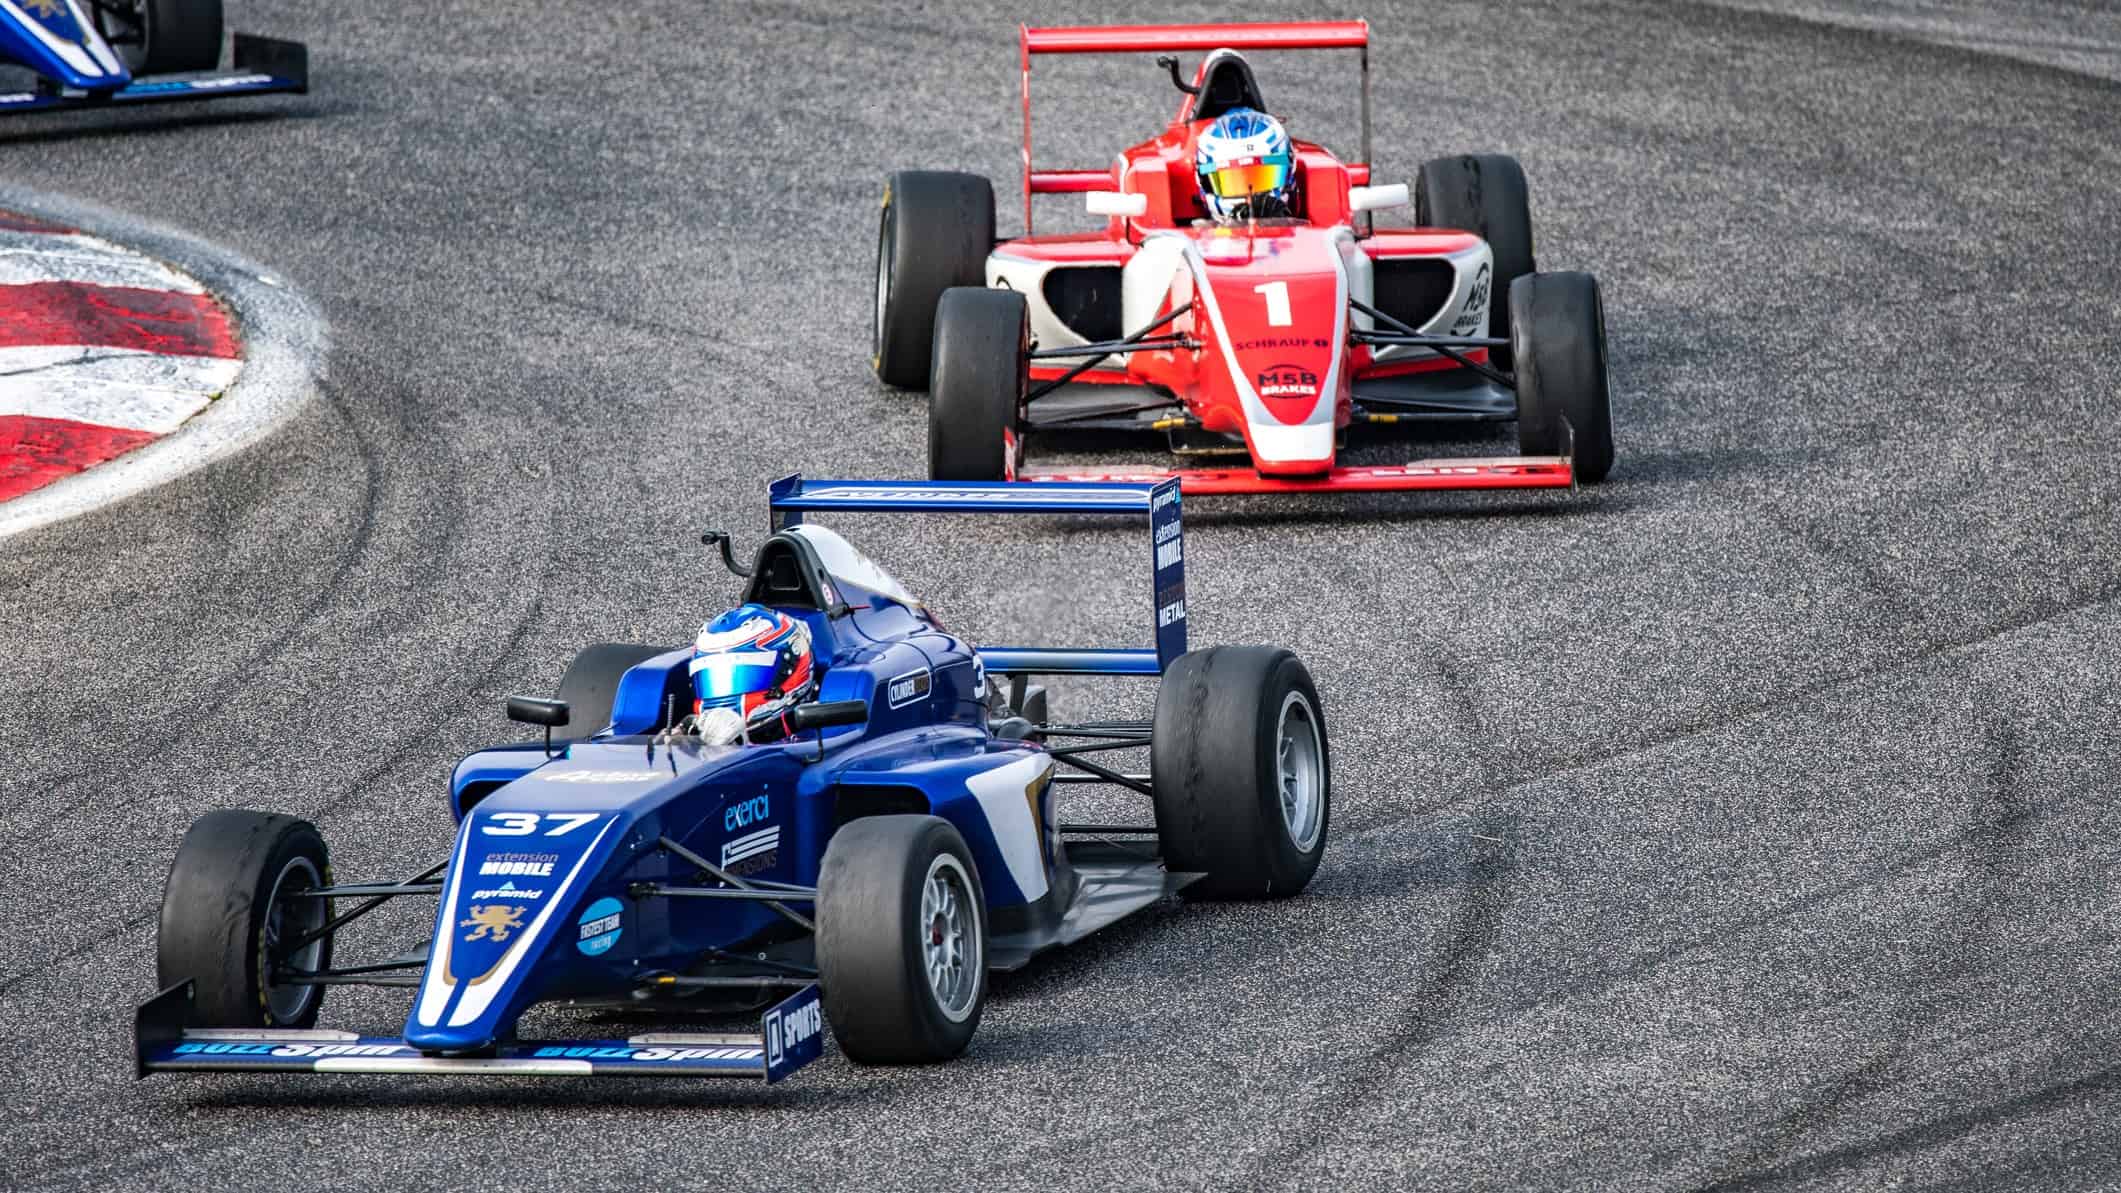 two racing cars battle to take first place on a formula one track with one tailing the the leader and looking to overtake the car.